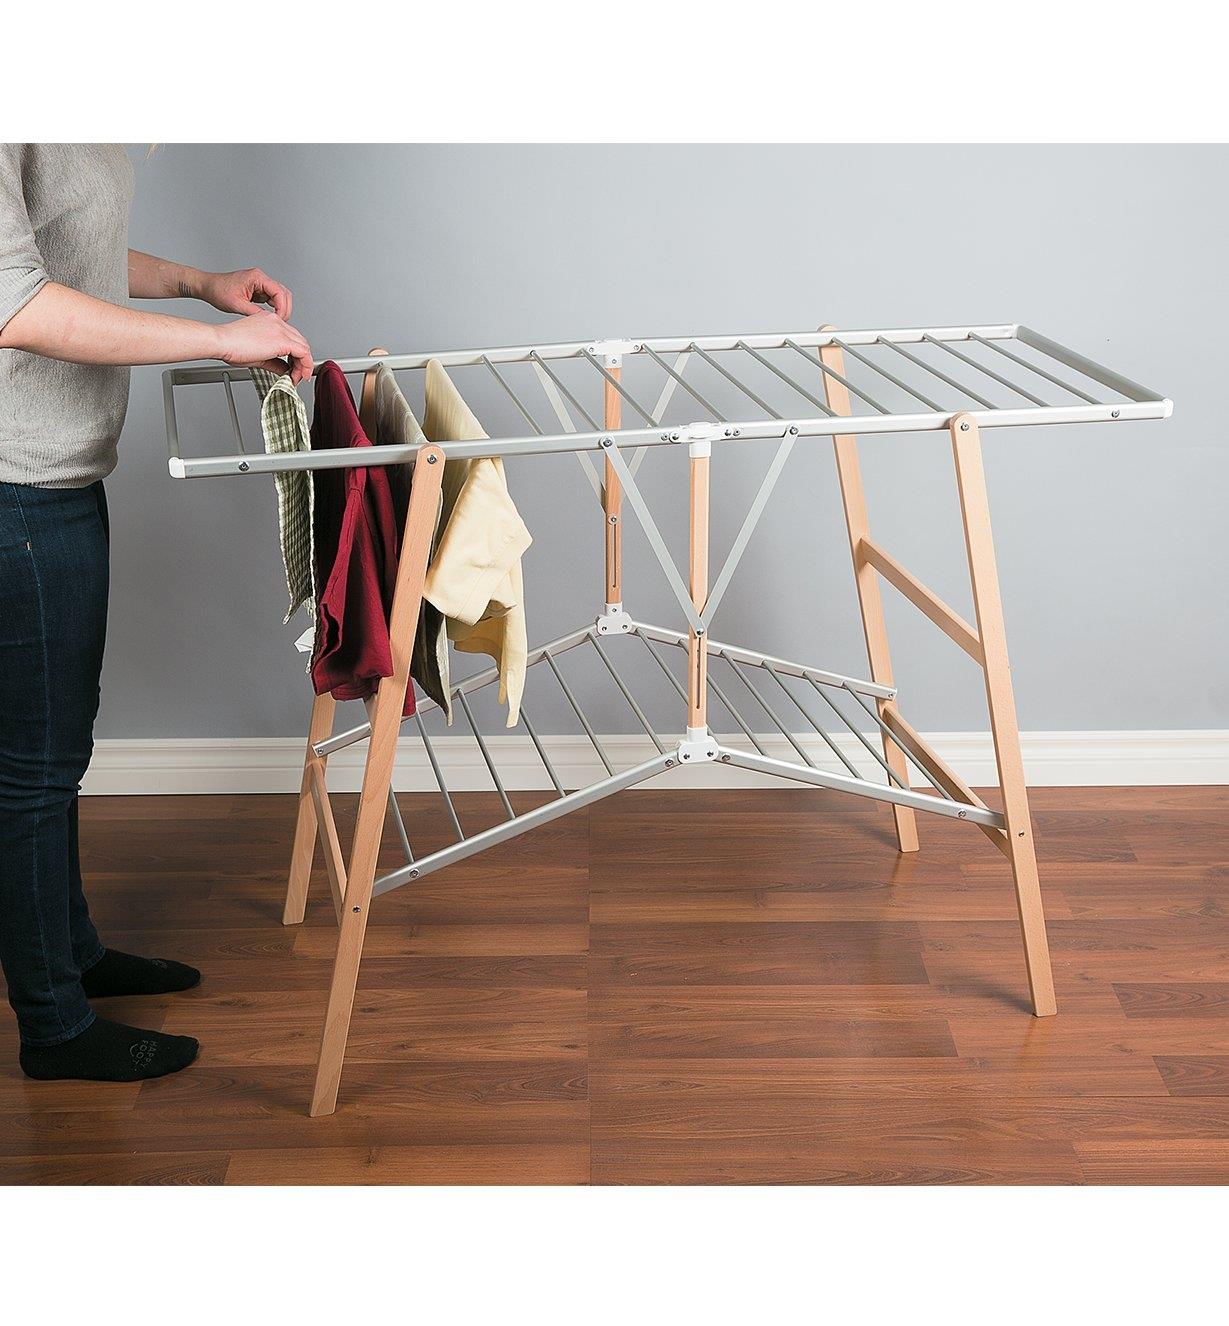 Folding Floor Clothes Dryer unfolded with towels and clothes hanging on the bars